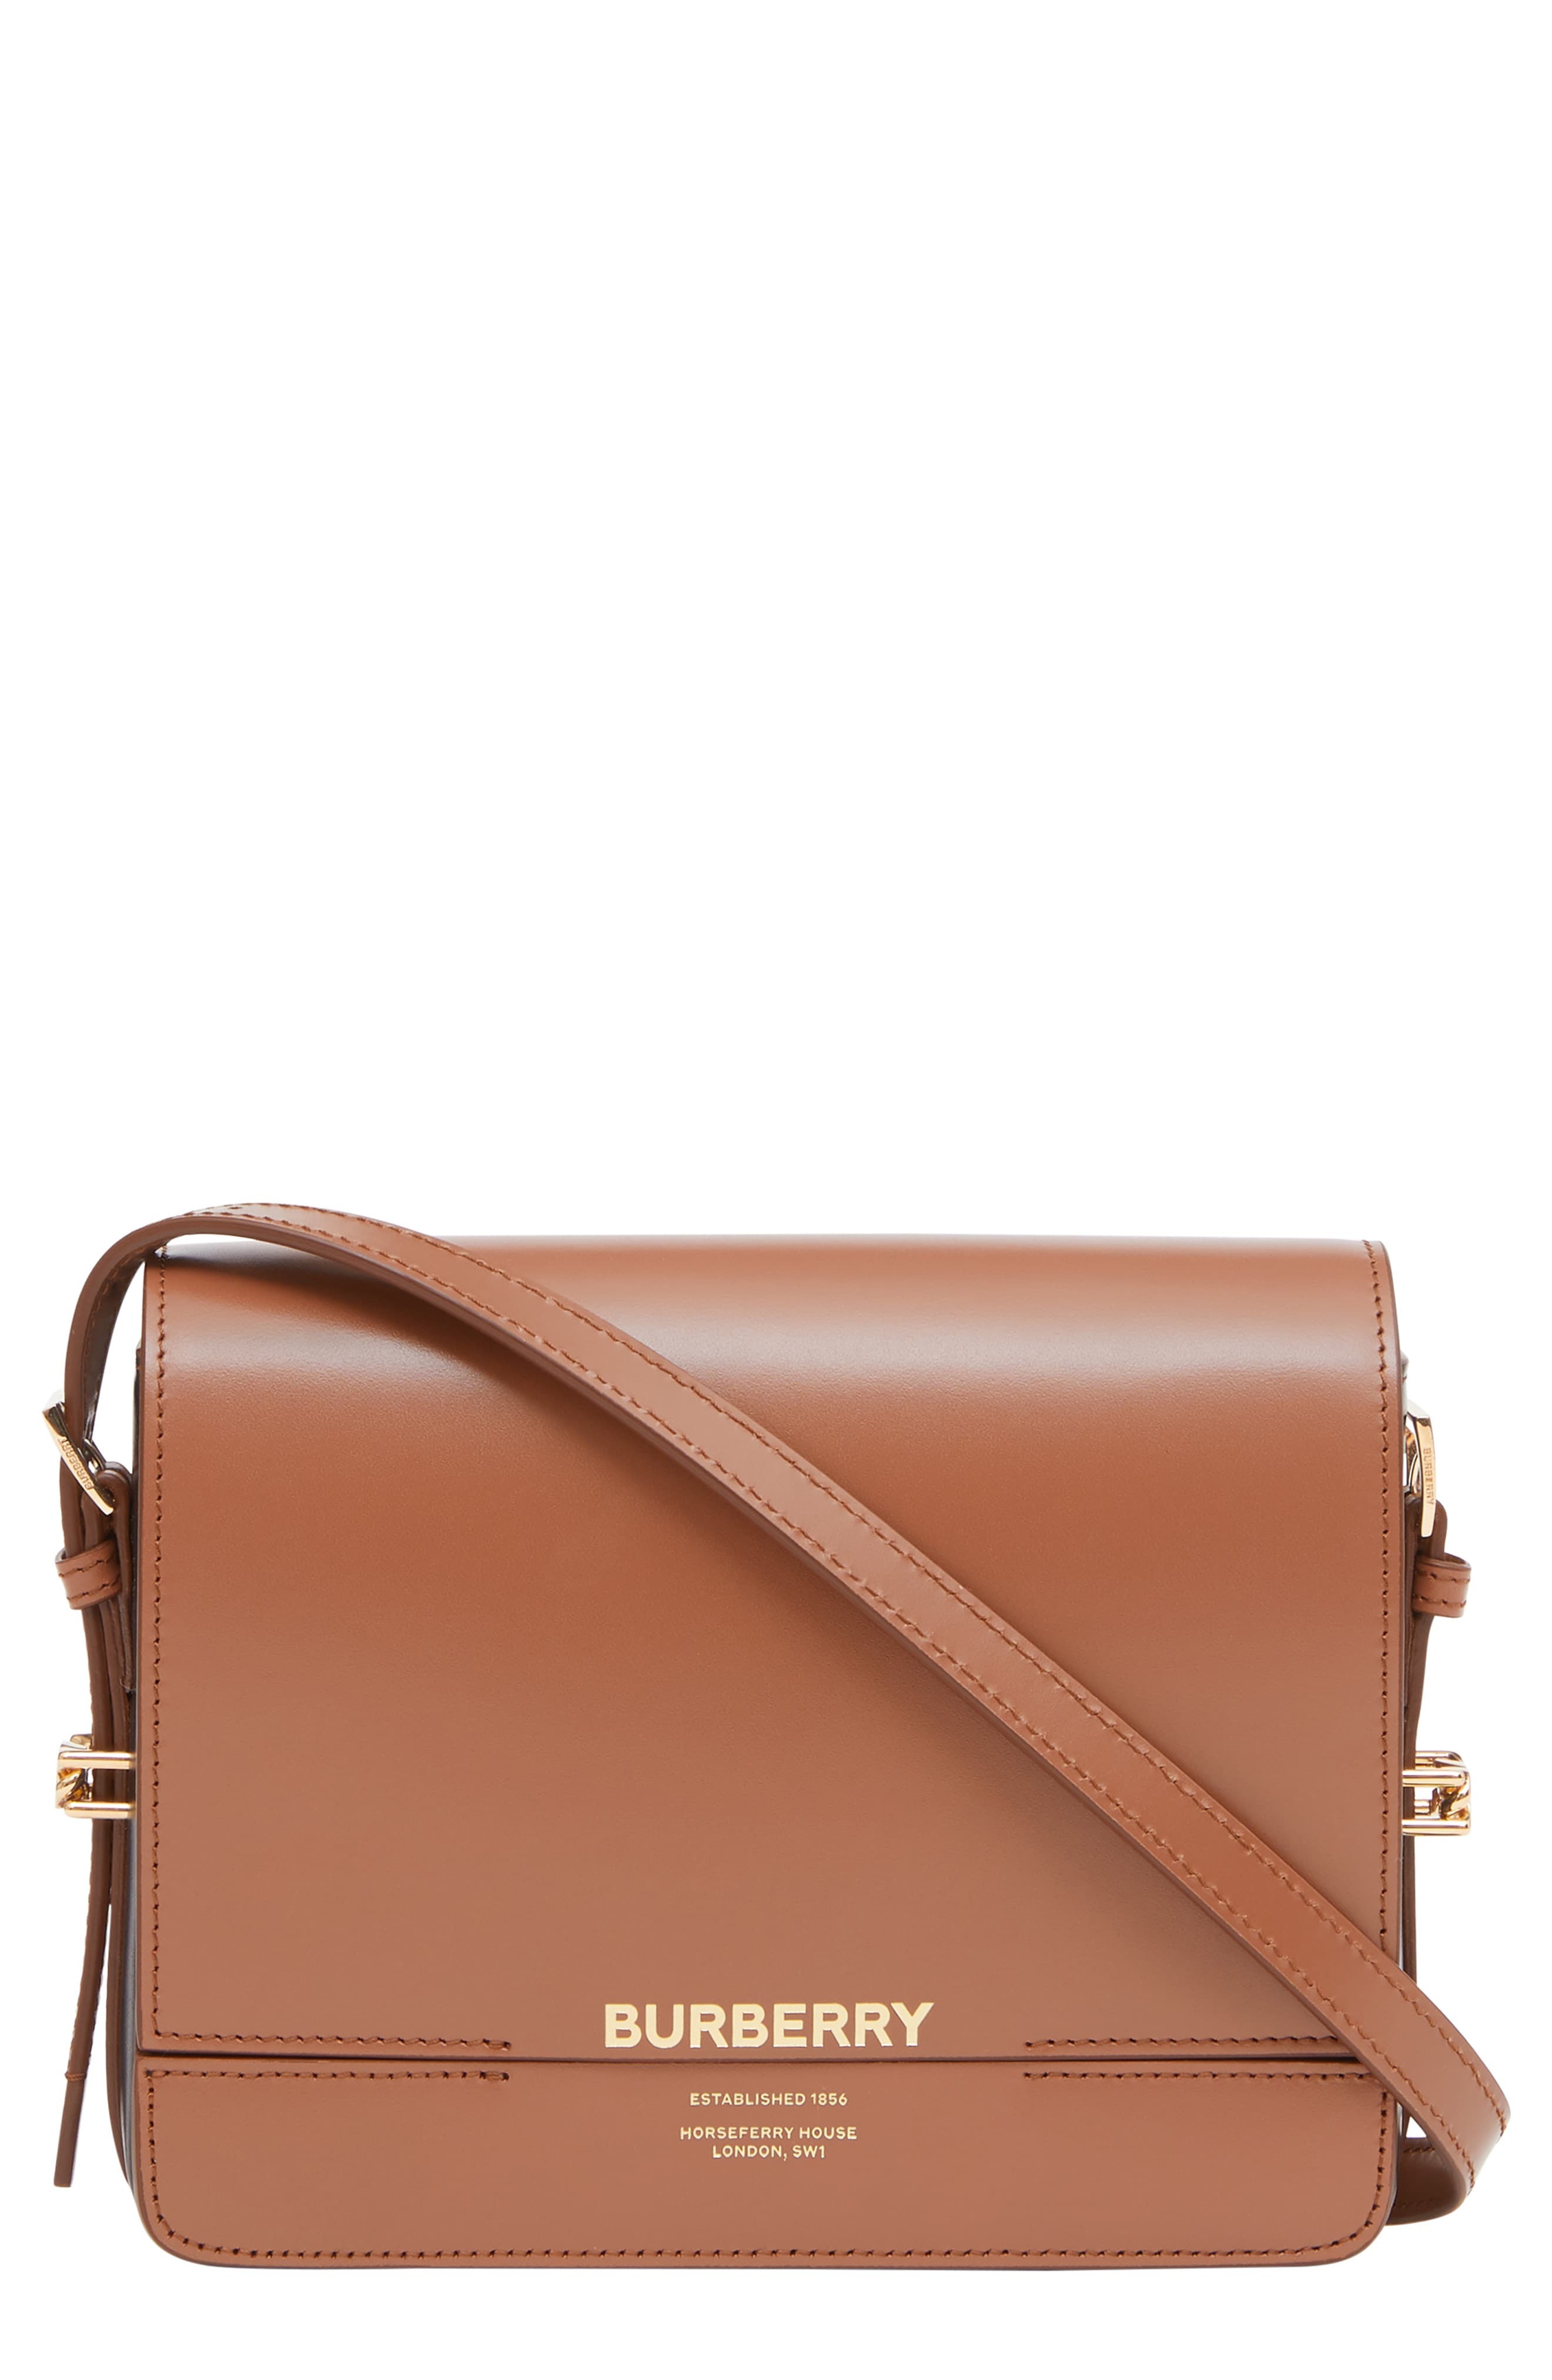 Burberry Small Grace Colorblock Leather Crossbody Bag, $1,250 | Nordstrom |  Lookastic